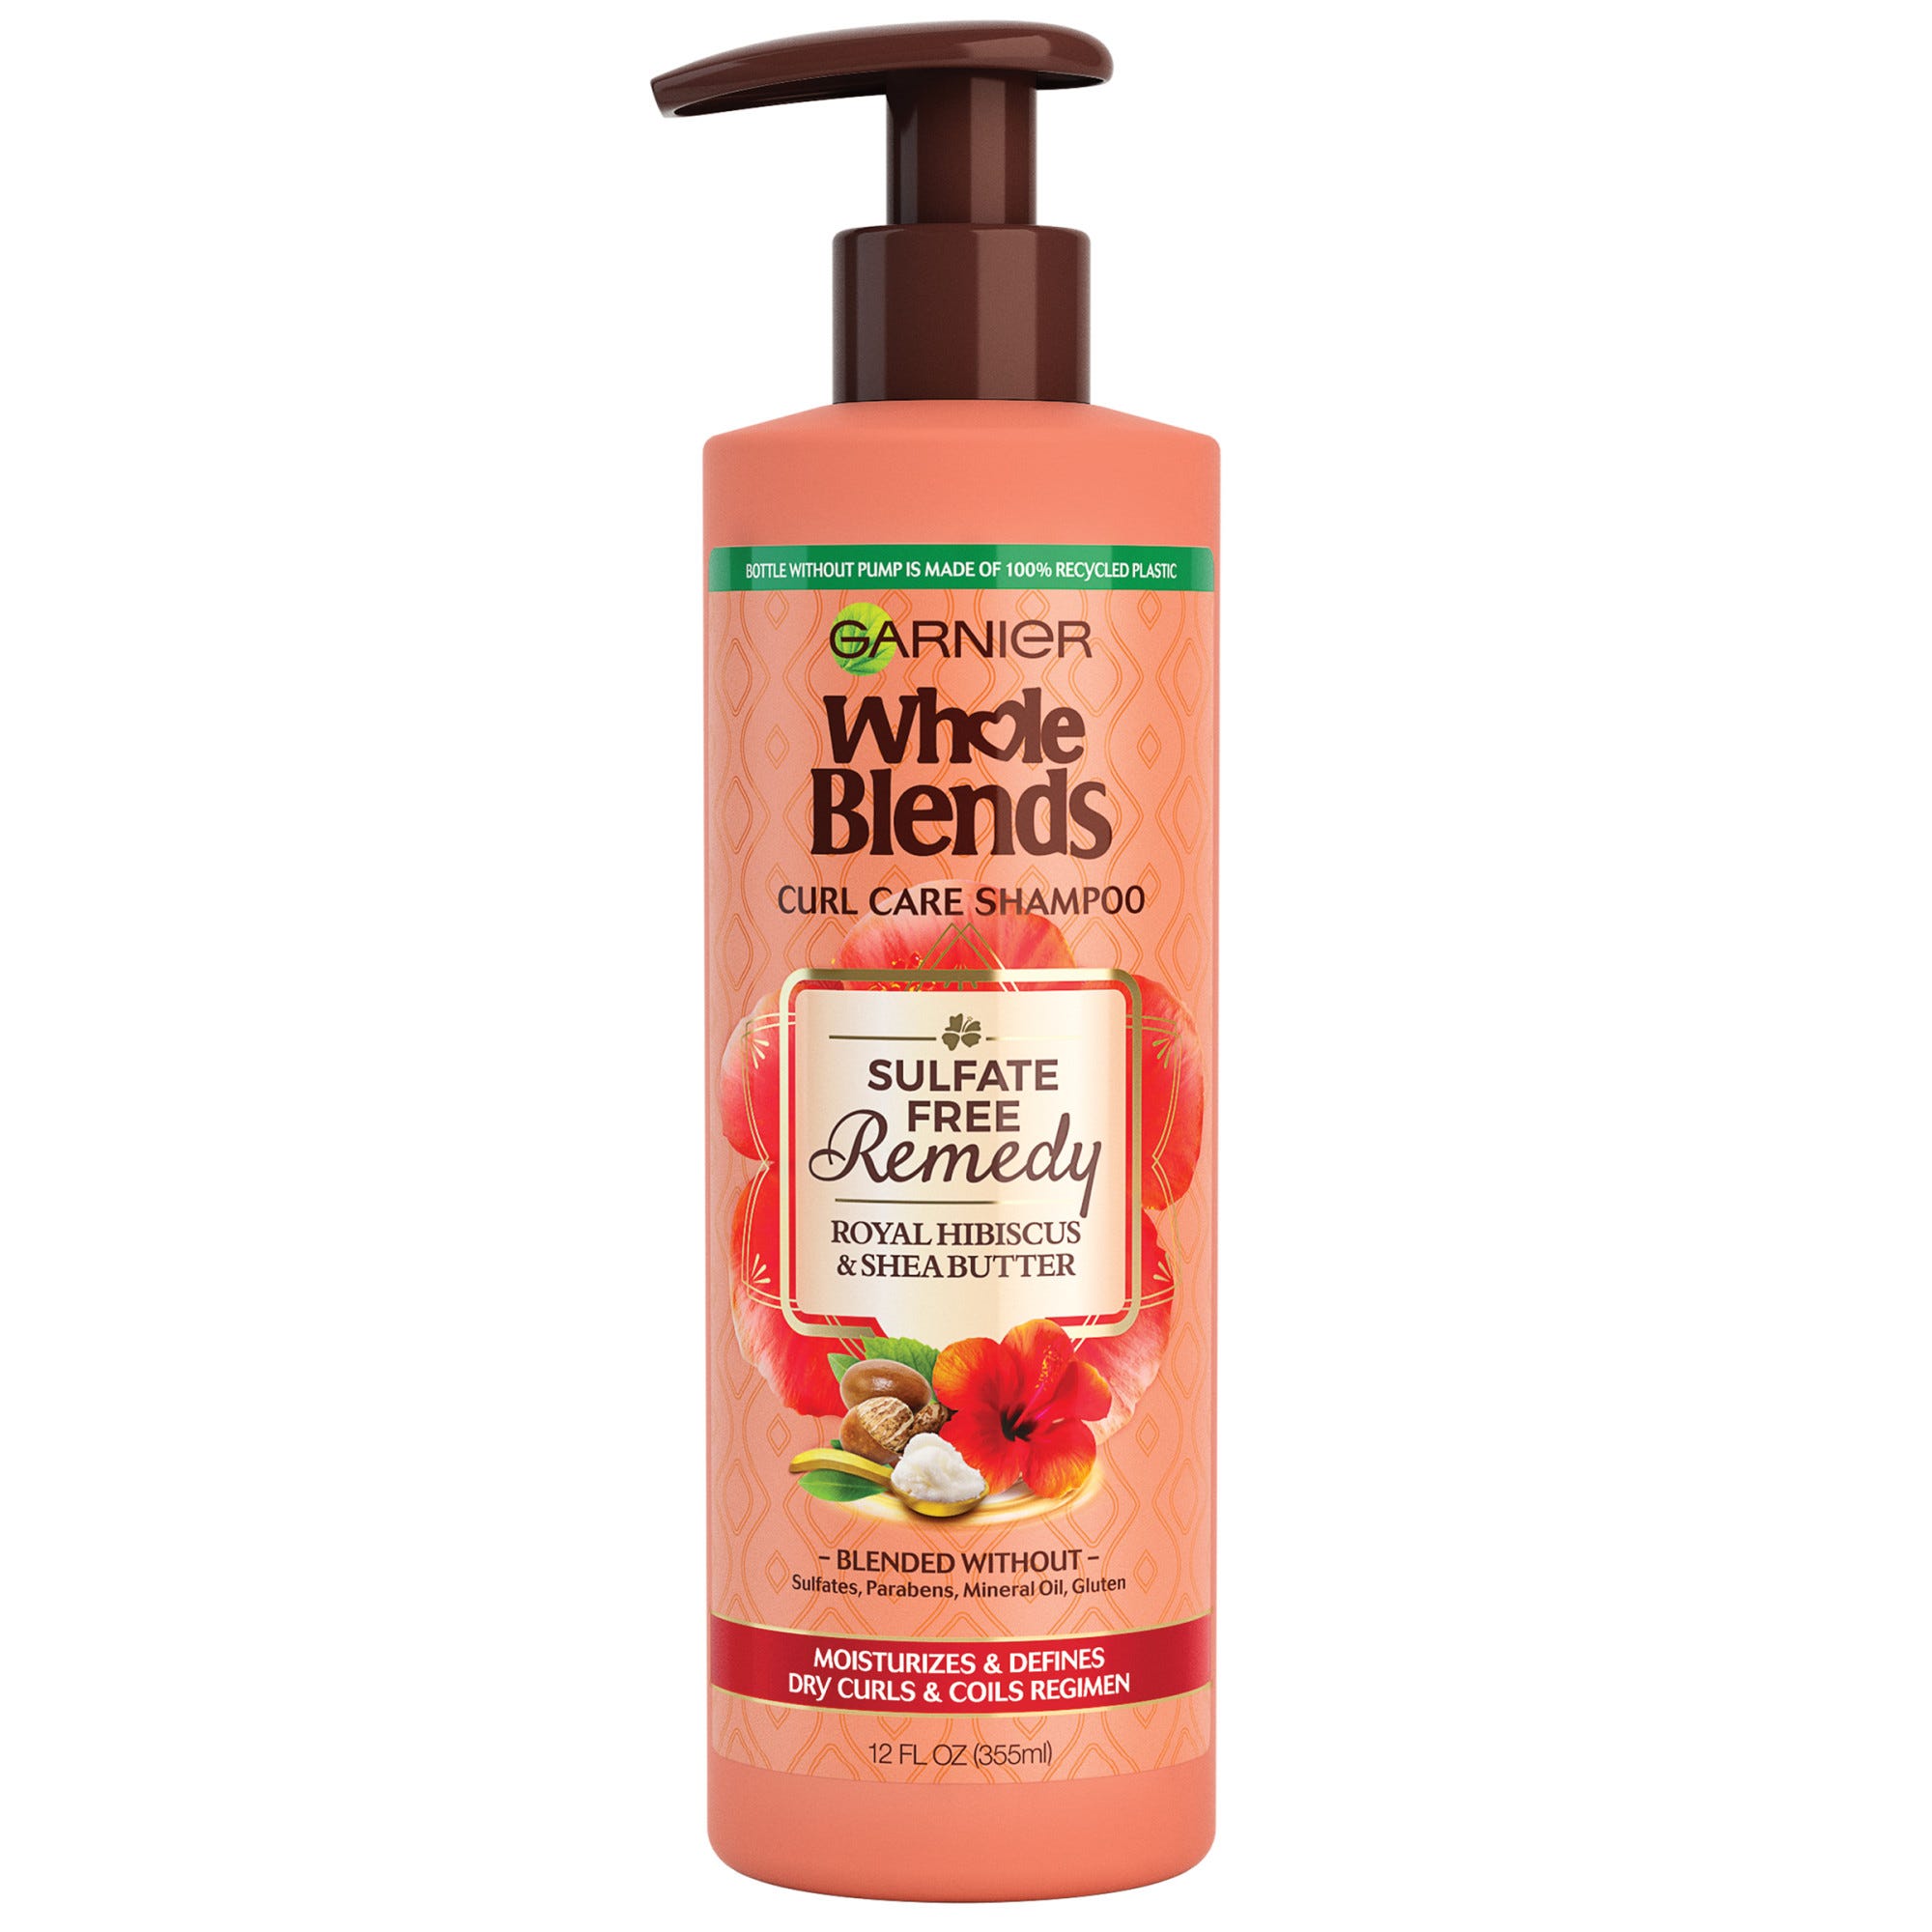 Garnier Whole Blends Sulfate Free Remedy Hibiscus and Shea Shampoo, Dry Curls - 12 fl oz